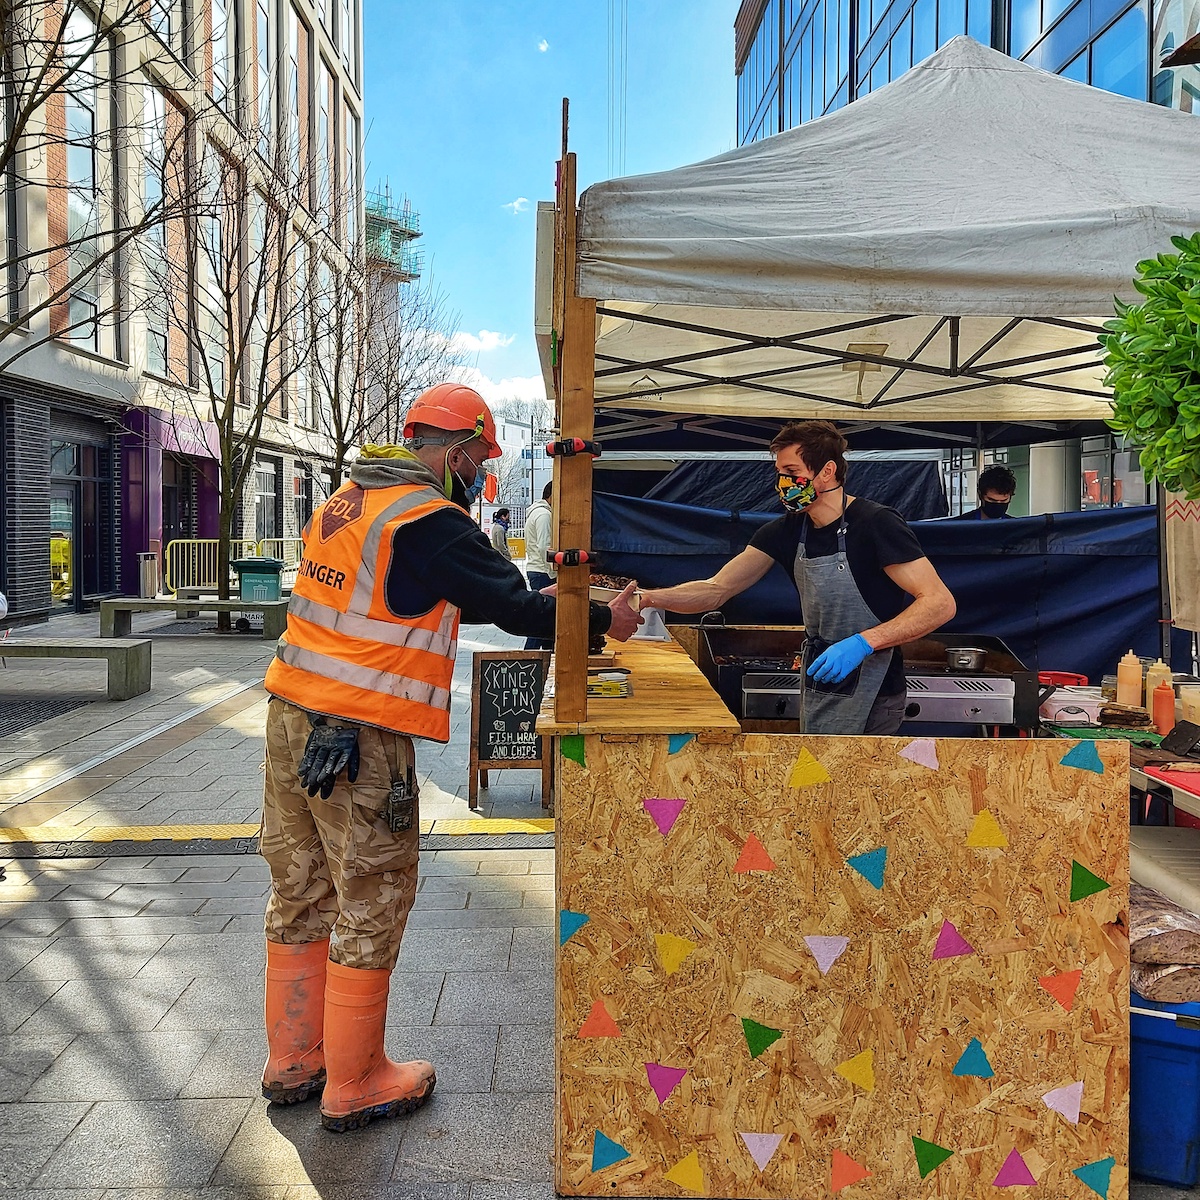 It's Friday which means we'll have the best selection of street food coming to @FinzelsReach this lunchtime for all your takeaway needs! Please continue to observe social distancing and wear a mask in the market area to keep us all safe and we look forward to seeing you at 11am. https://t.co/vWMVAoR9tx